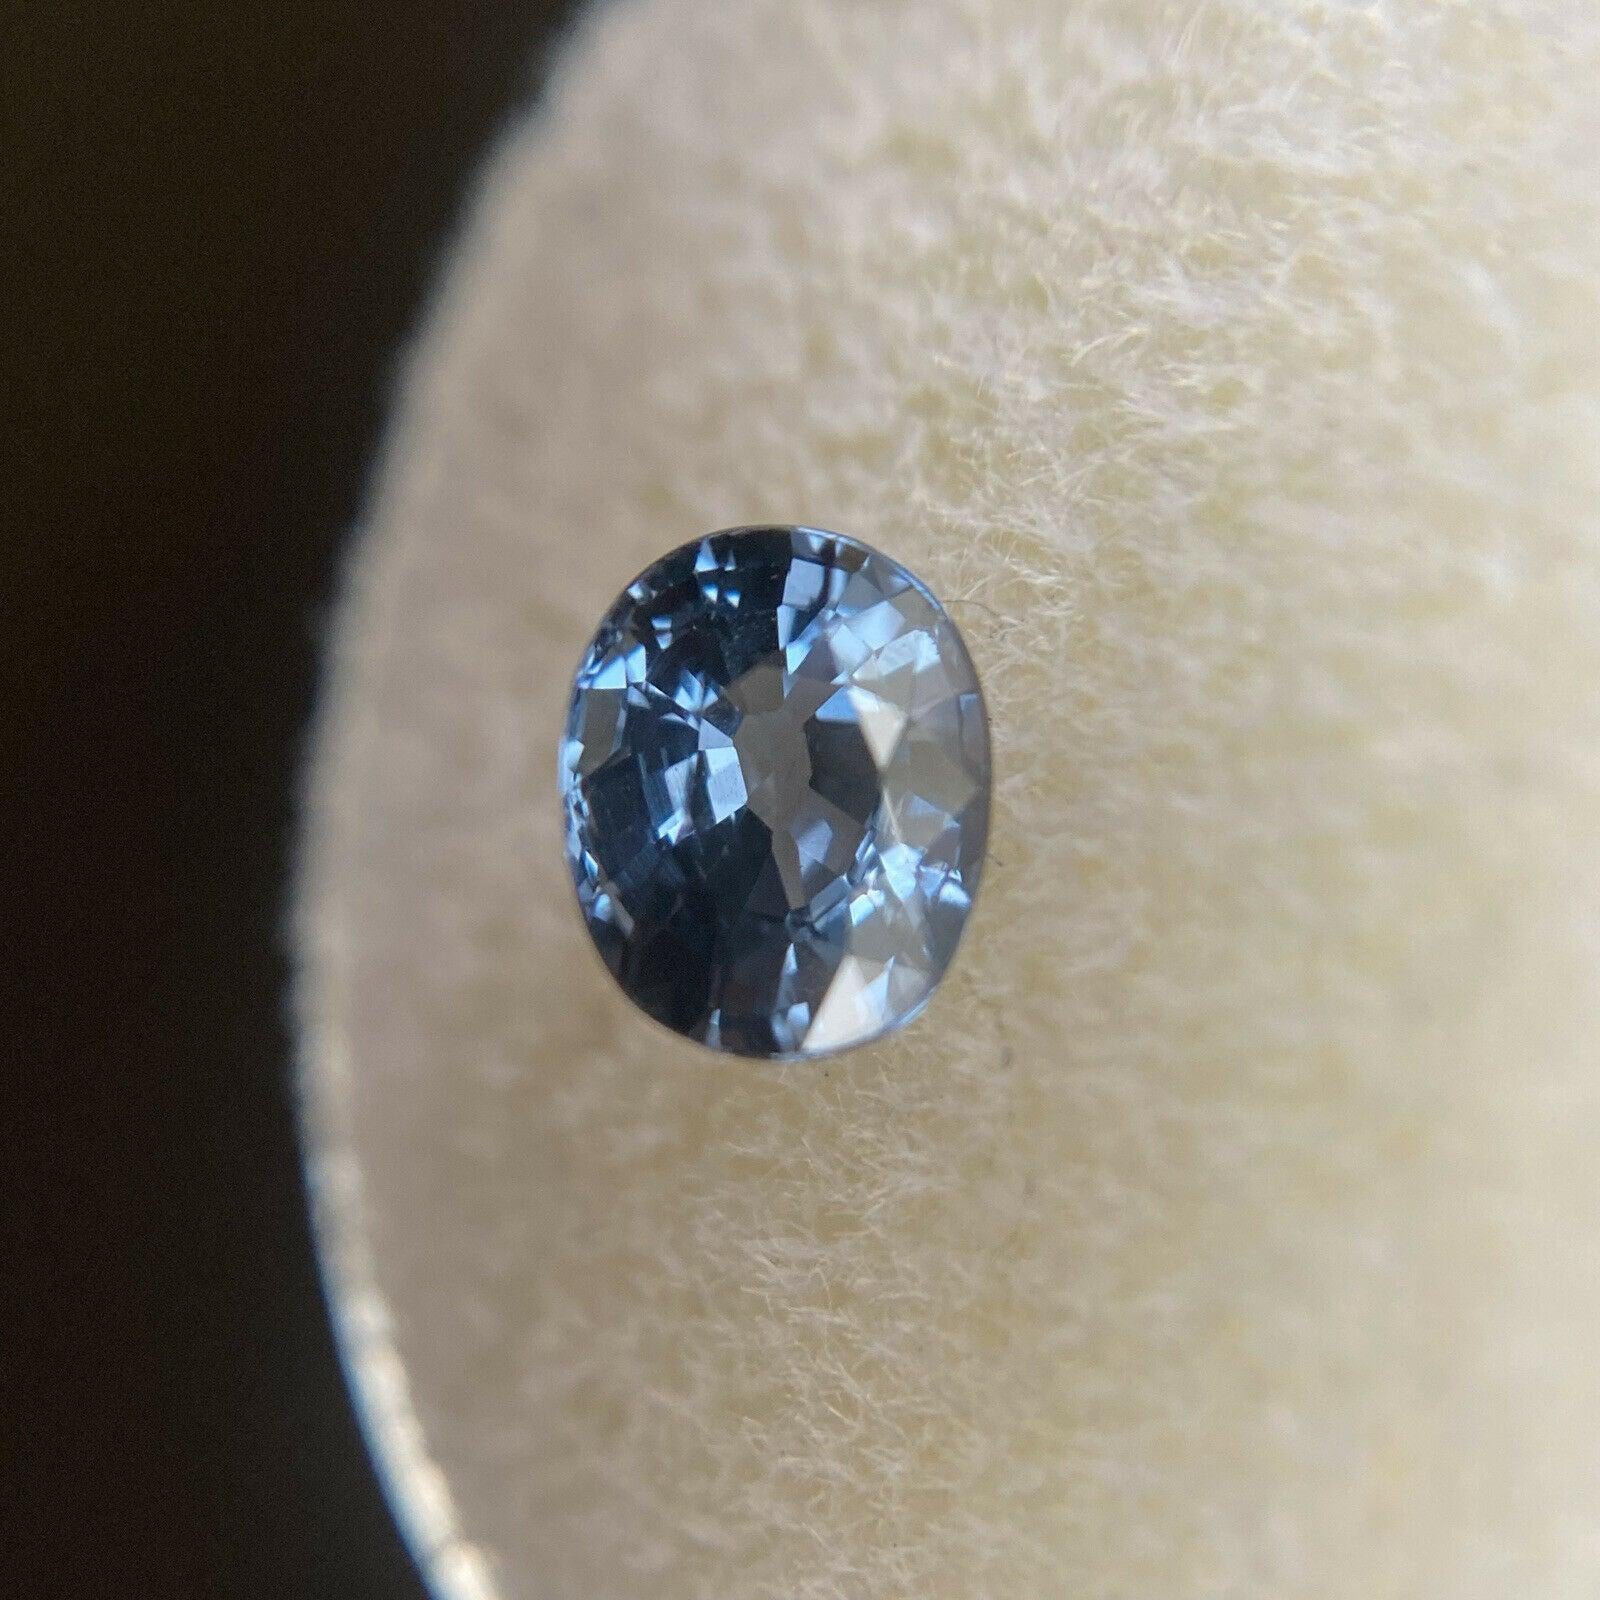 Fine Blue Spinel 1.08ct Oval Cut Rare Gemstone 6.5 x 5.3mm Loose Rare Gem

Fine Natural Blue Spinel Gemstone. 
Rare spinel with a fine vivid blue colour and excellent clarity. A very clean gem. Totally untreated and unheated. Also has a very good